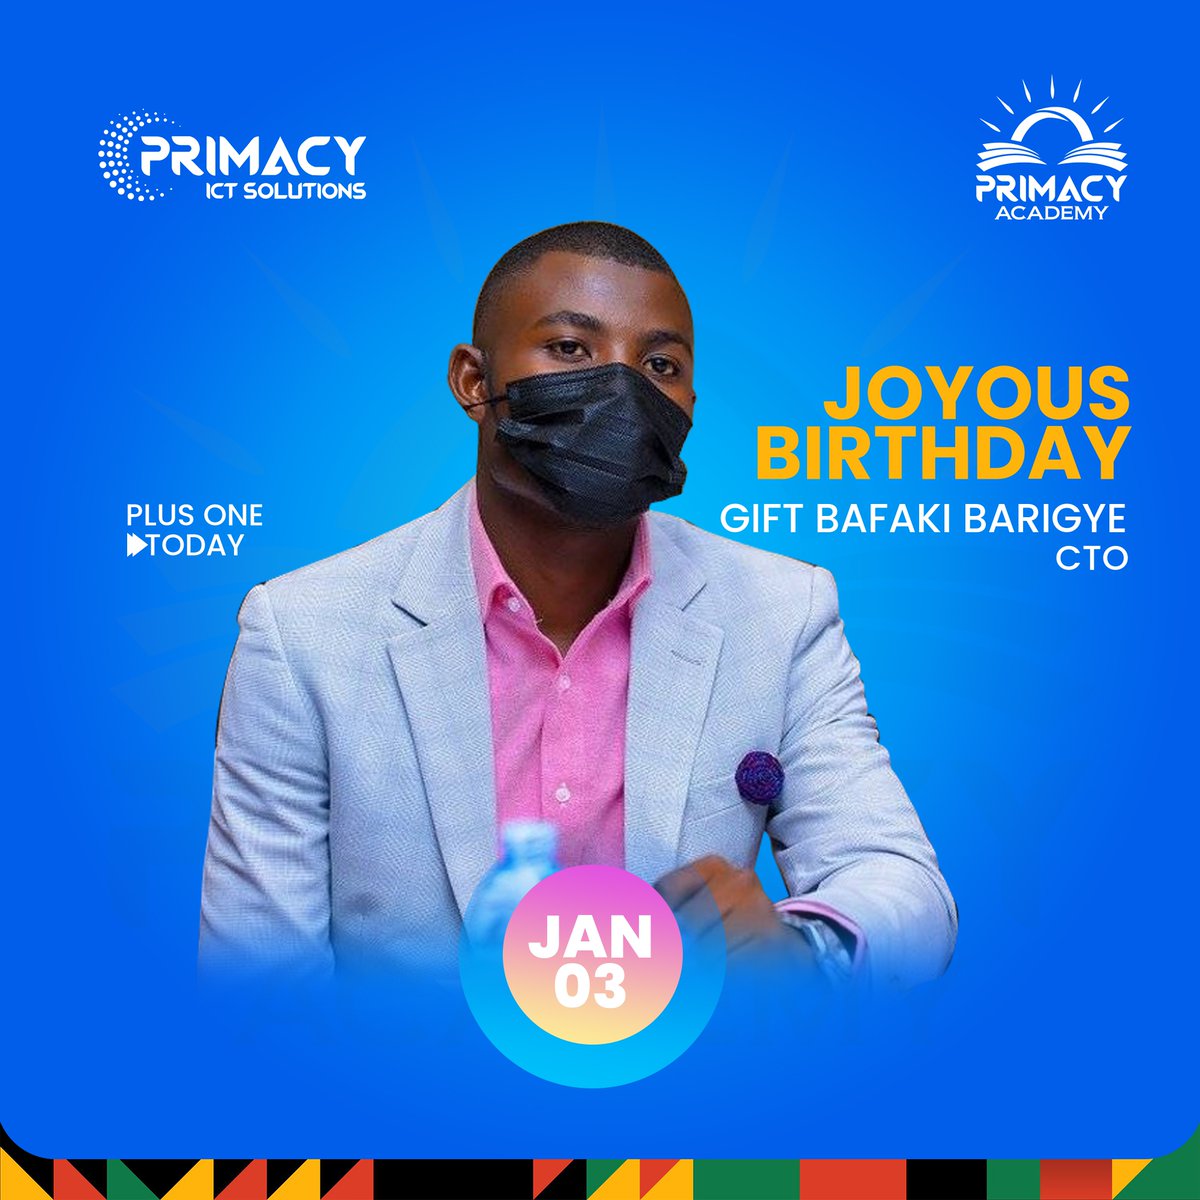 Wishing our one and only a day filled with joy and unforgettable moments. Happy Birthday CTO! May the year ahead be as special as you are. #HAPPYBIRTHDAY #primacy